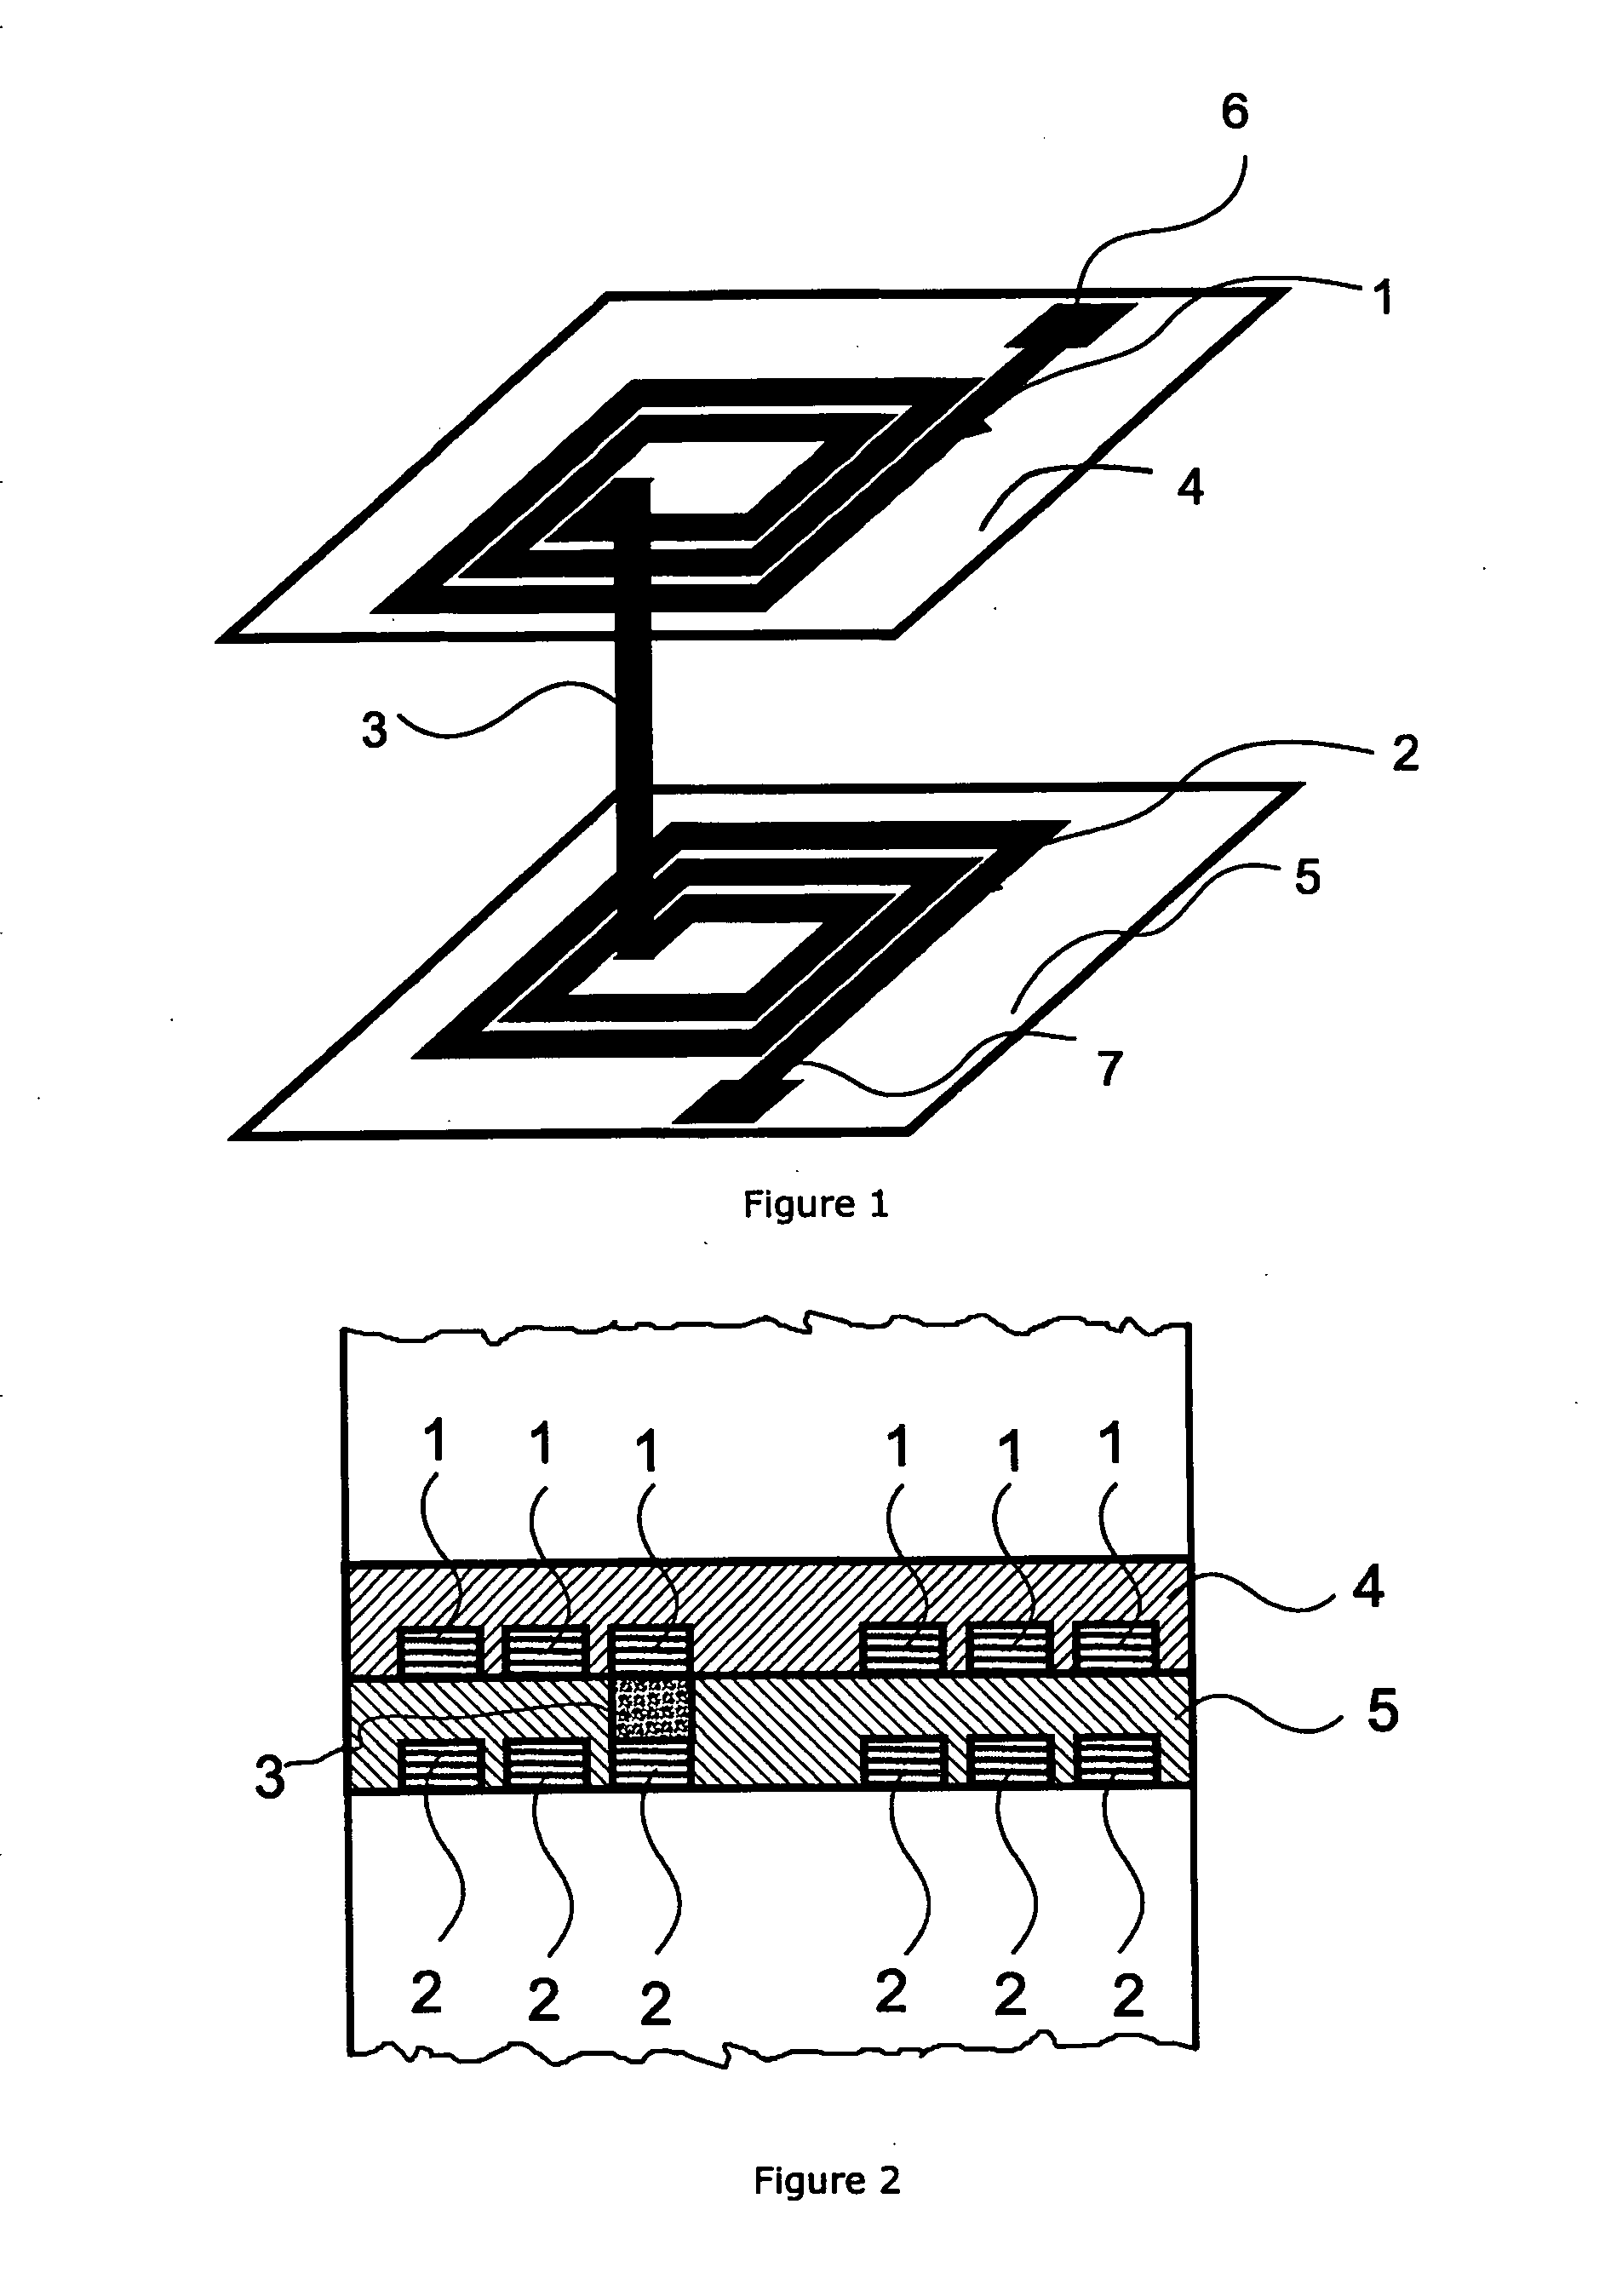 Integrated or printed margarita shaped inductor